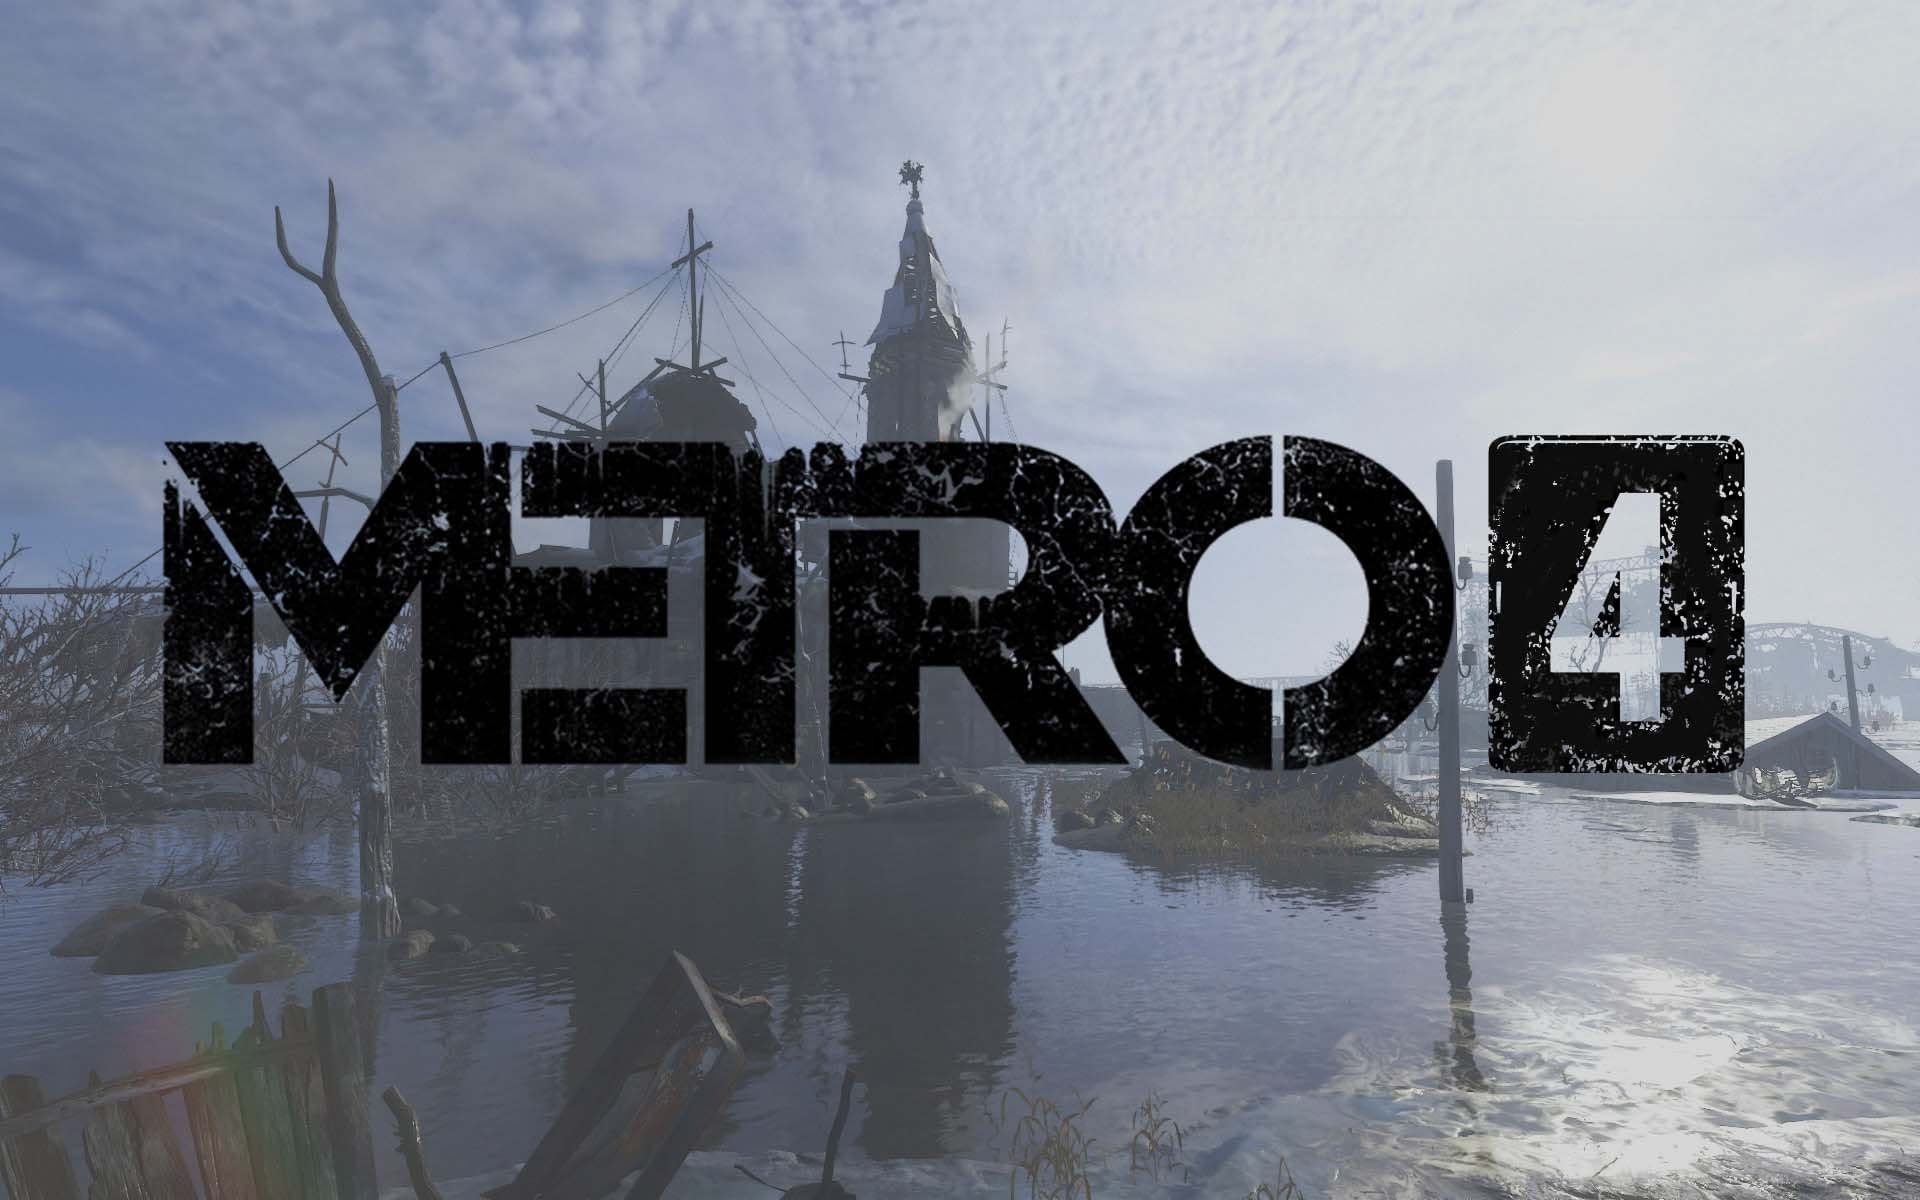 4A Games: The continuing game of Metro Exodus is completely playable!